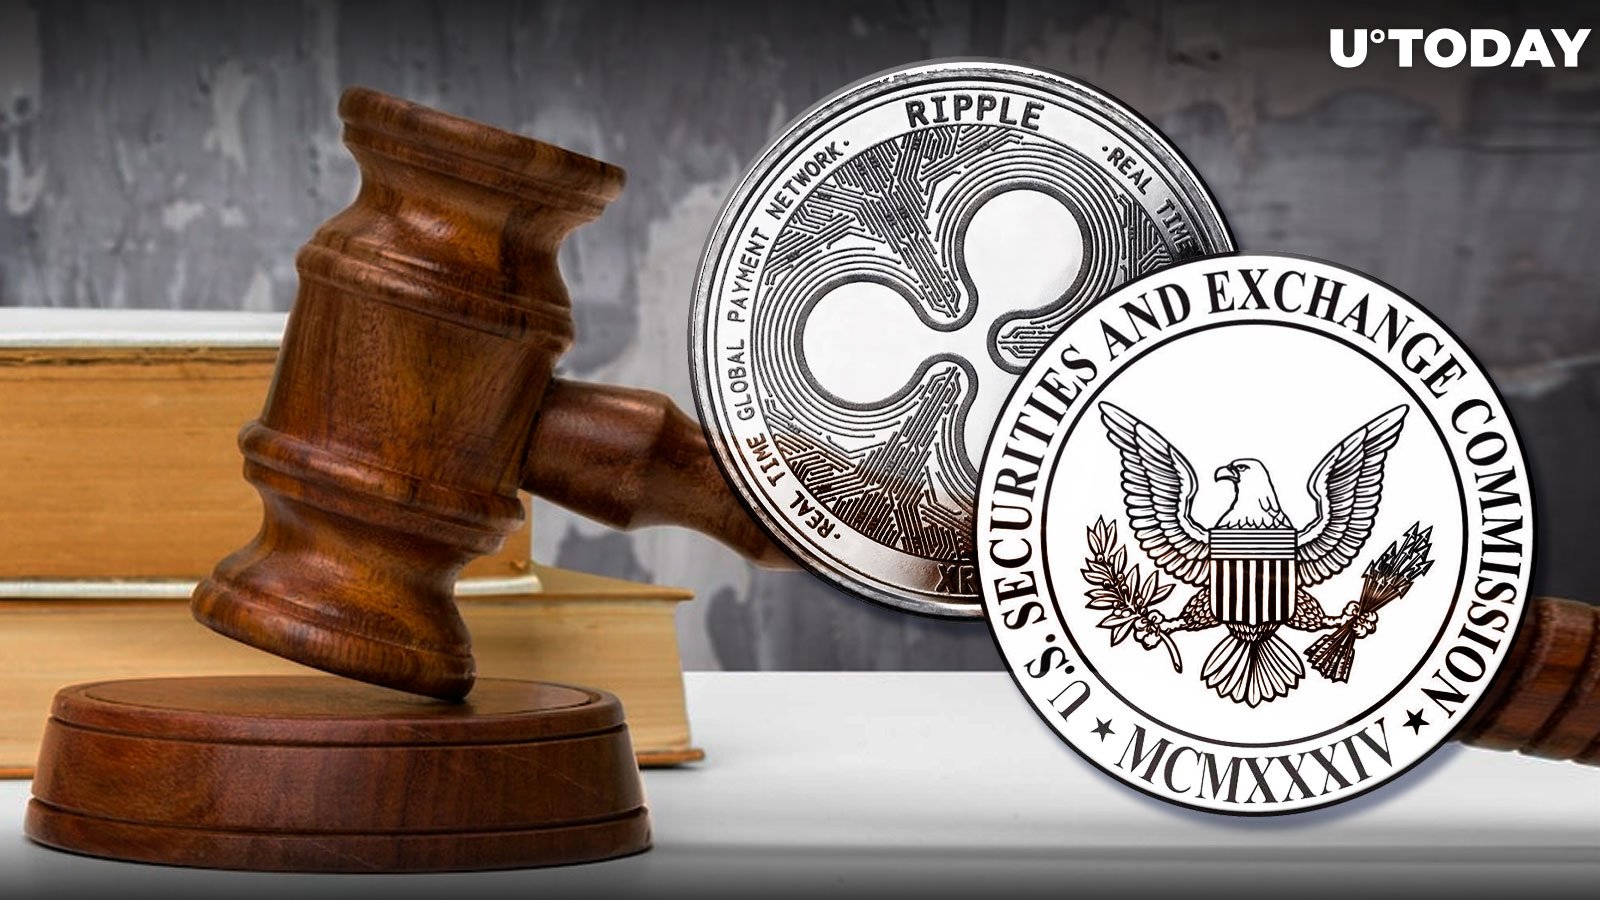 Ripple v. SEC: Non-Party Asks Court to Redact Details of Declaration Supporting Plaintiff 